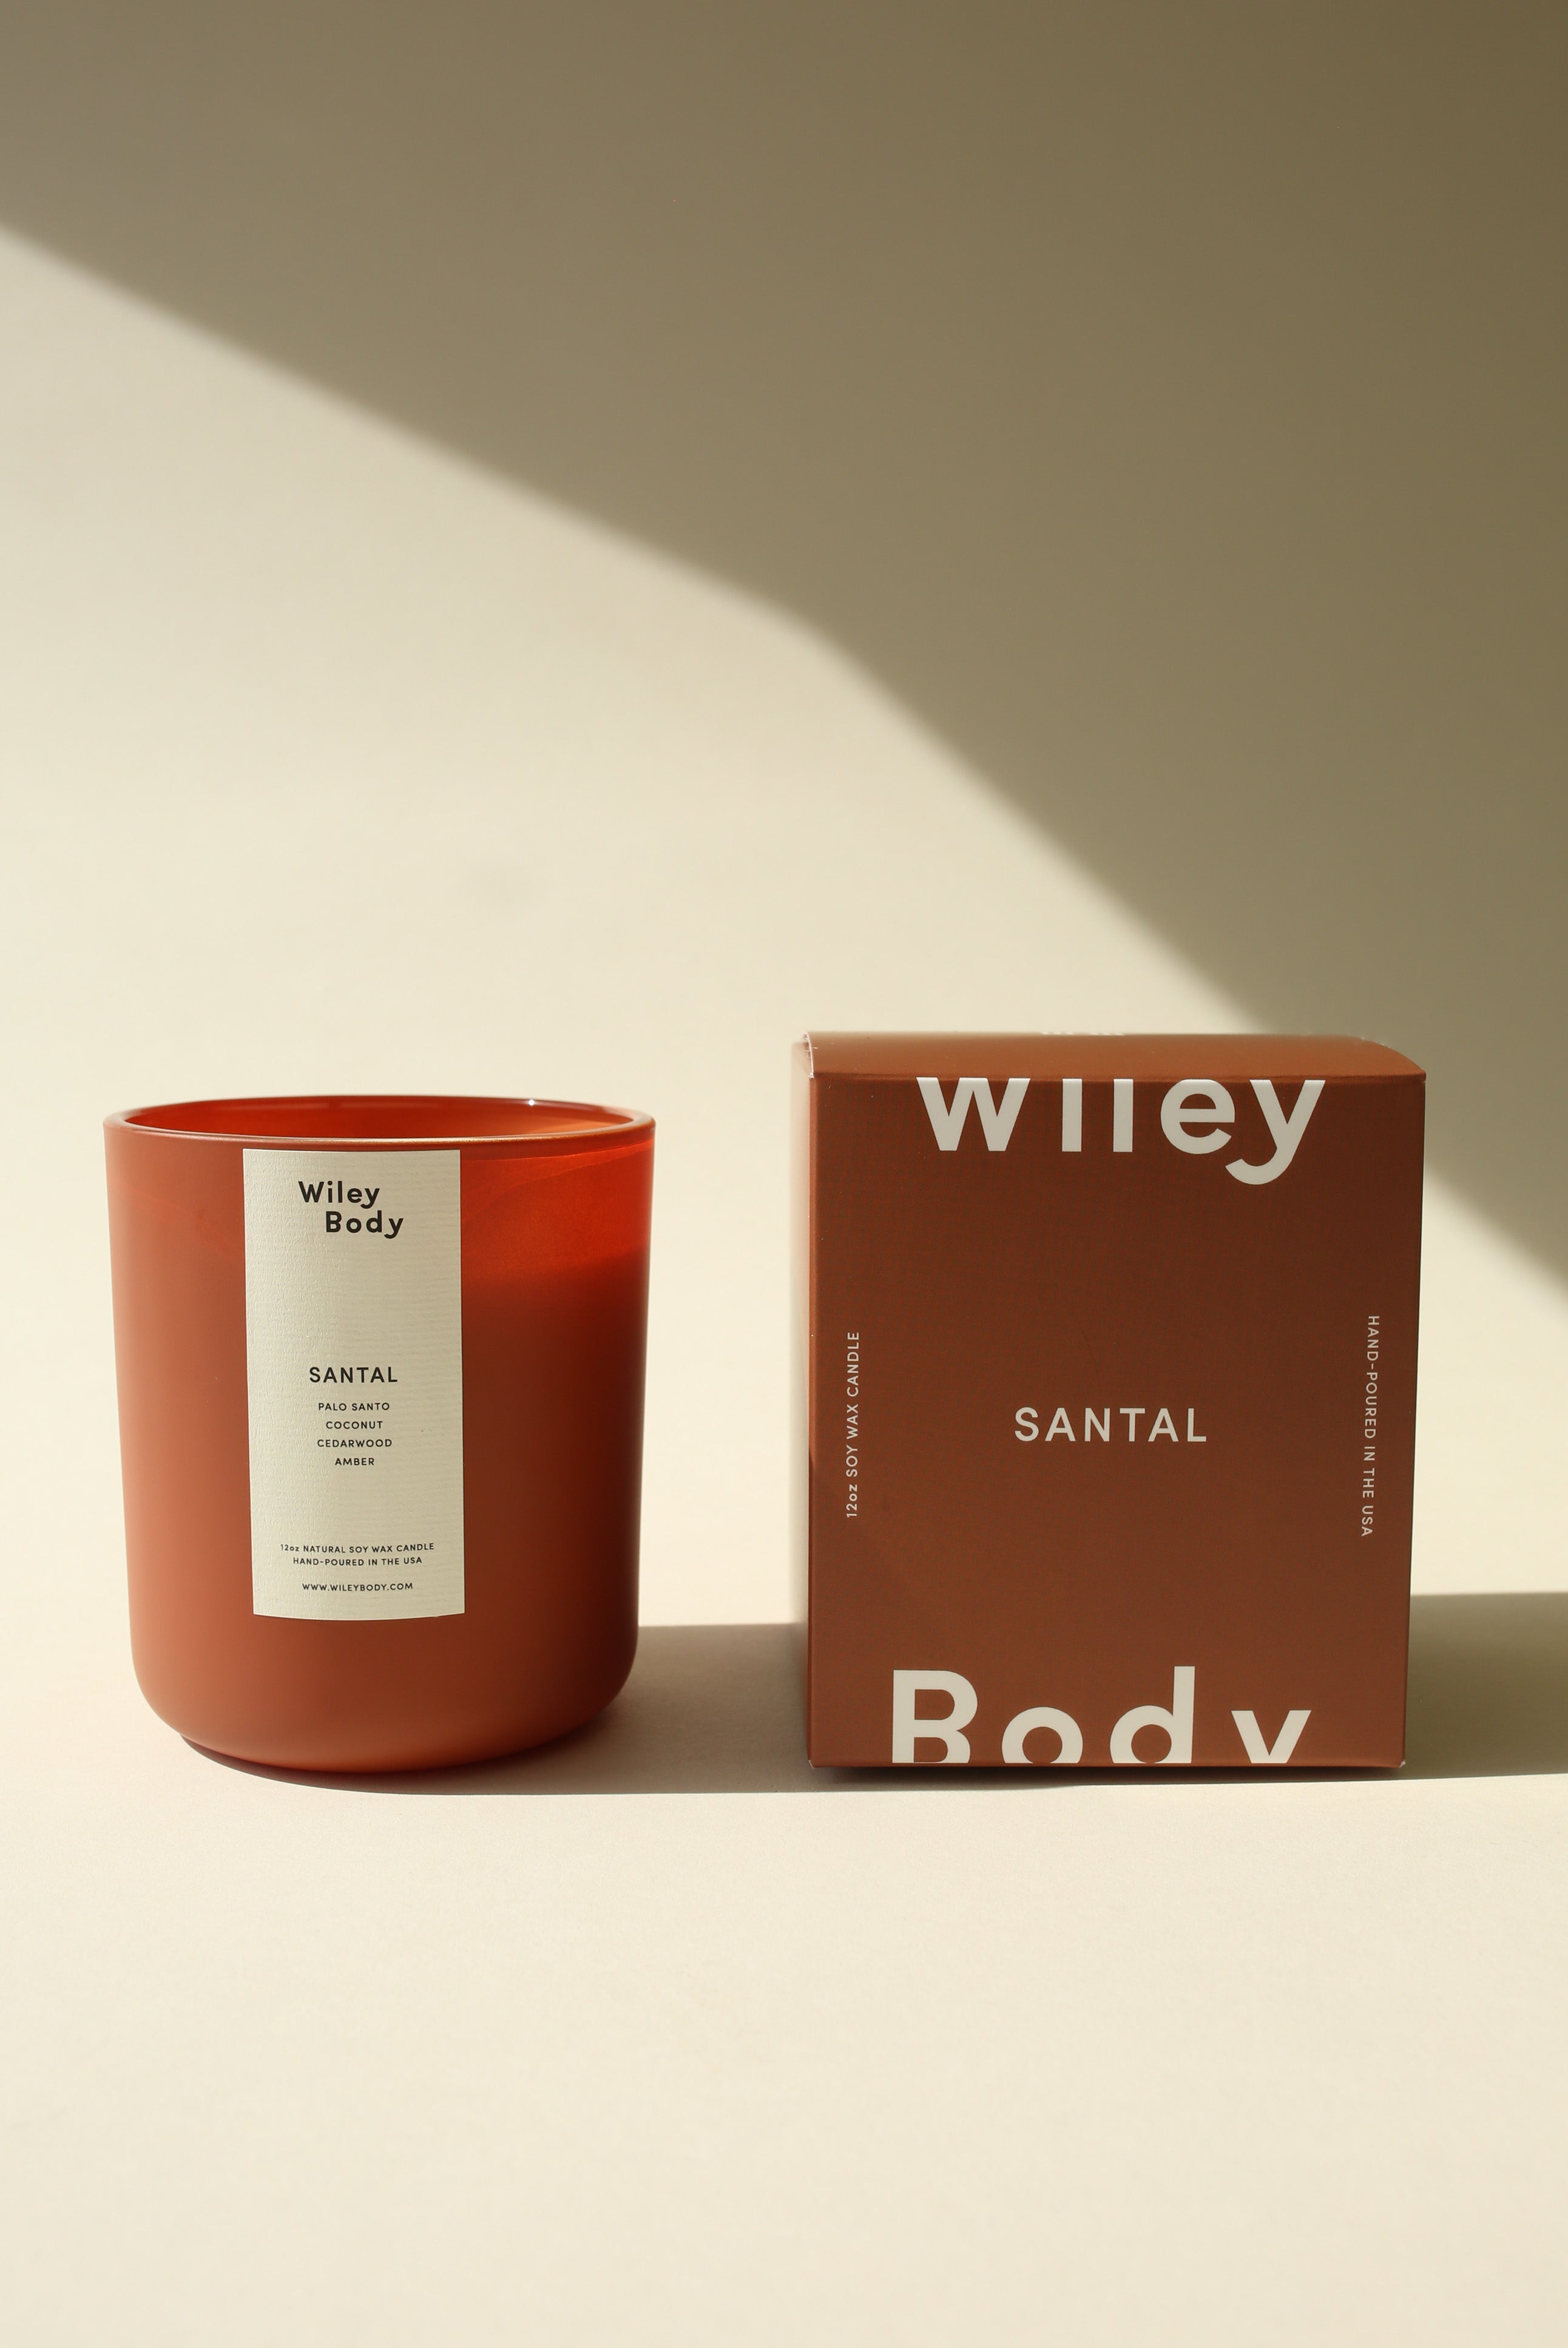 The Candle - Santal